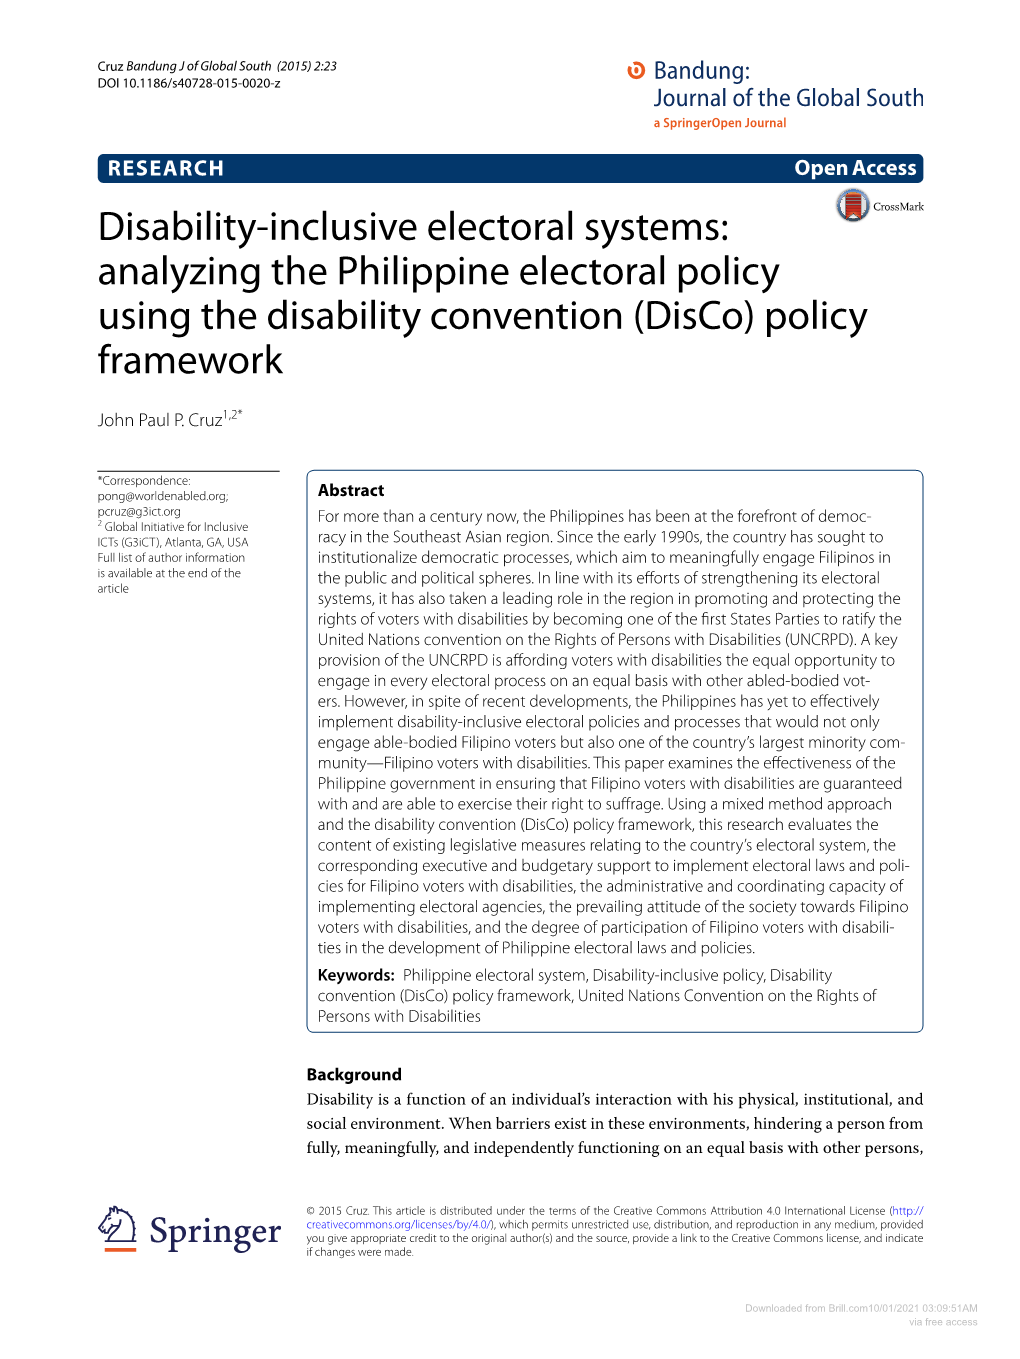 Disability‑Inclusive Electoral Systems: Analyzing the Philippine Electoral Policy Using the Disability Convention (Disco) Policy Framework